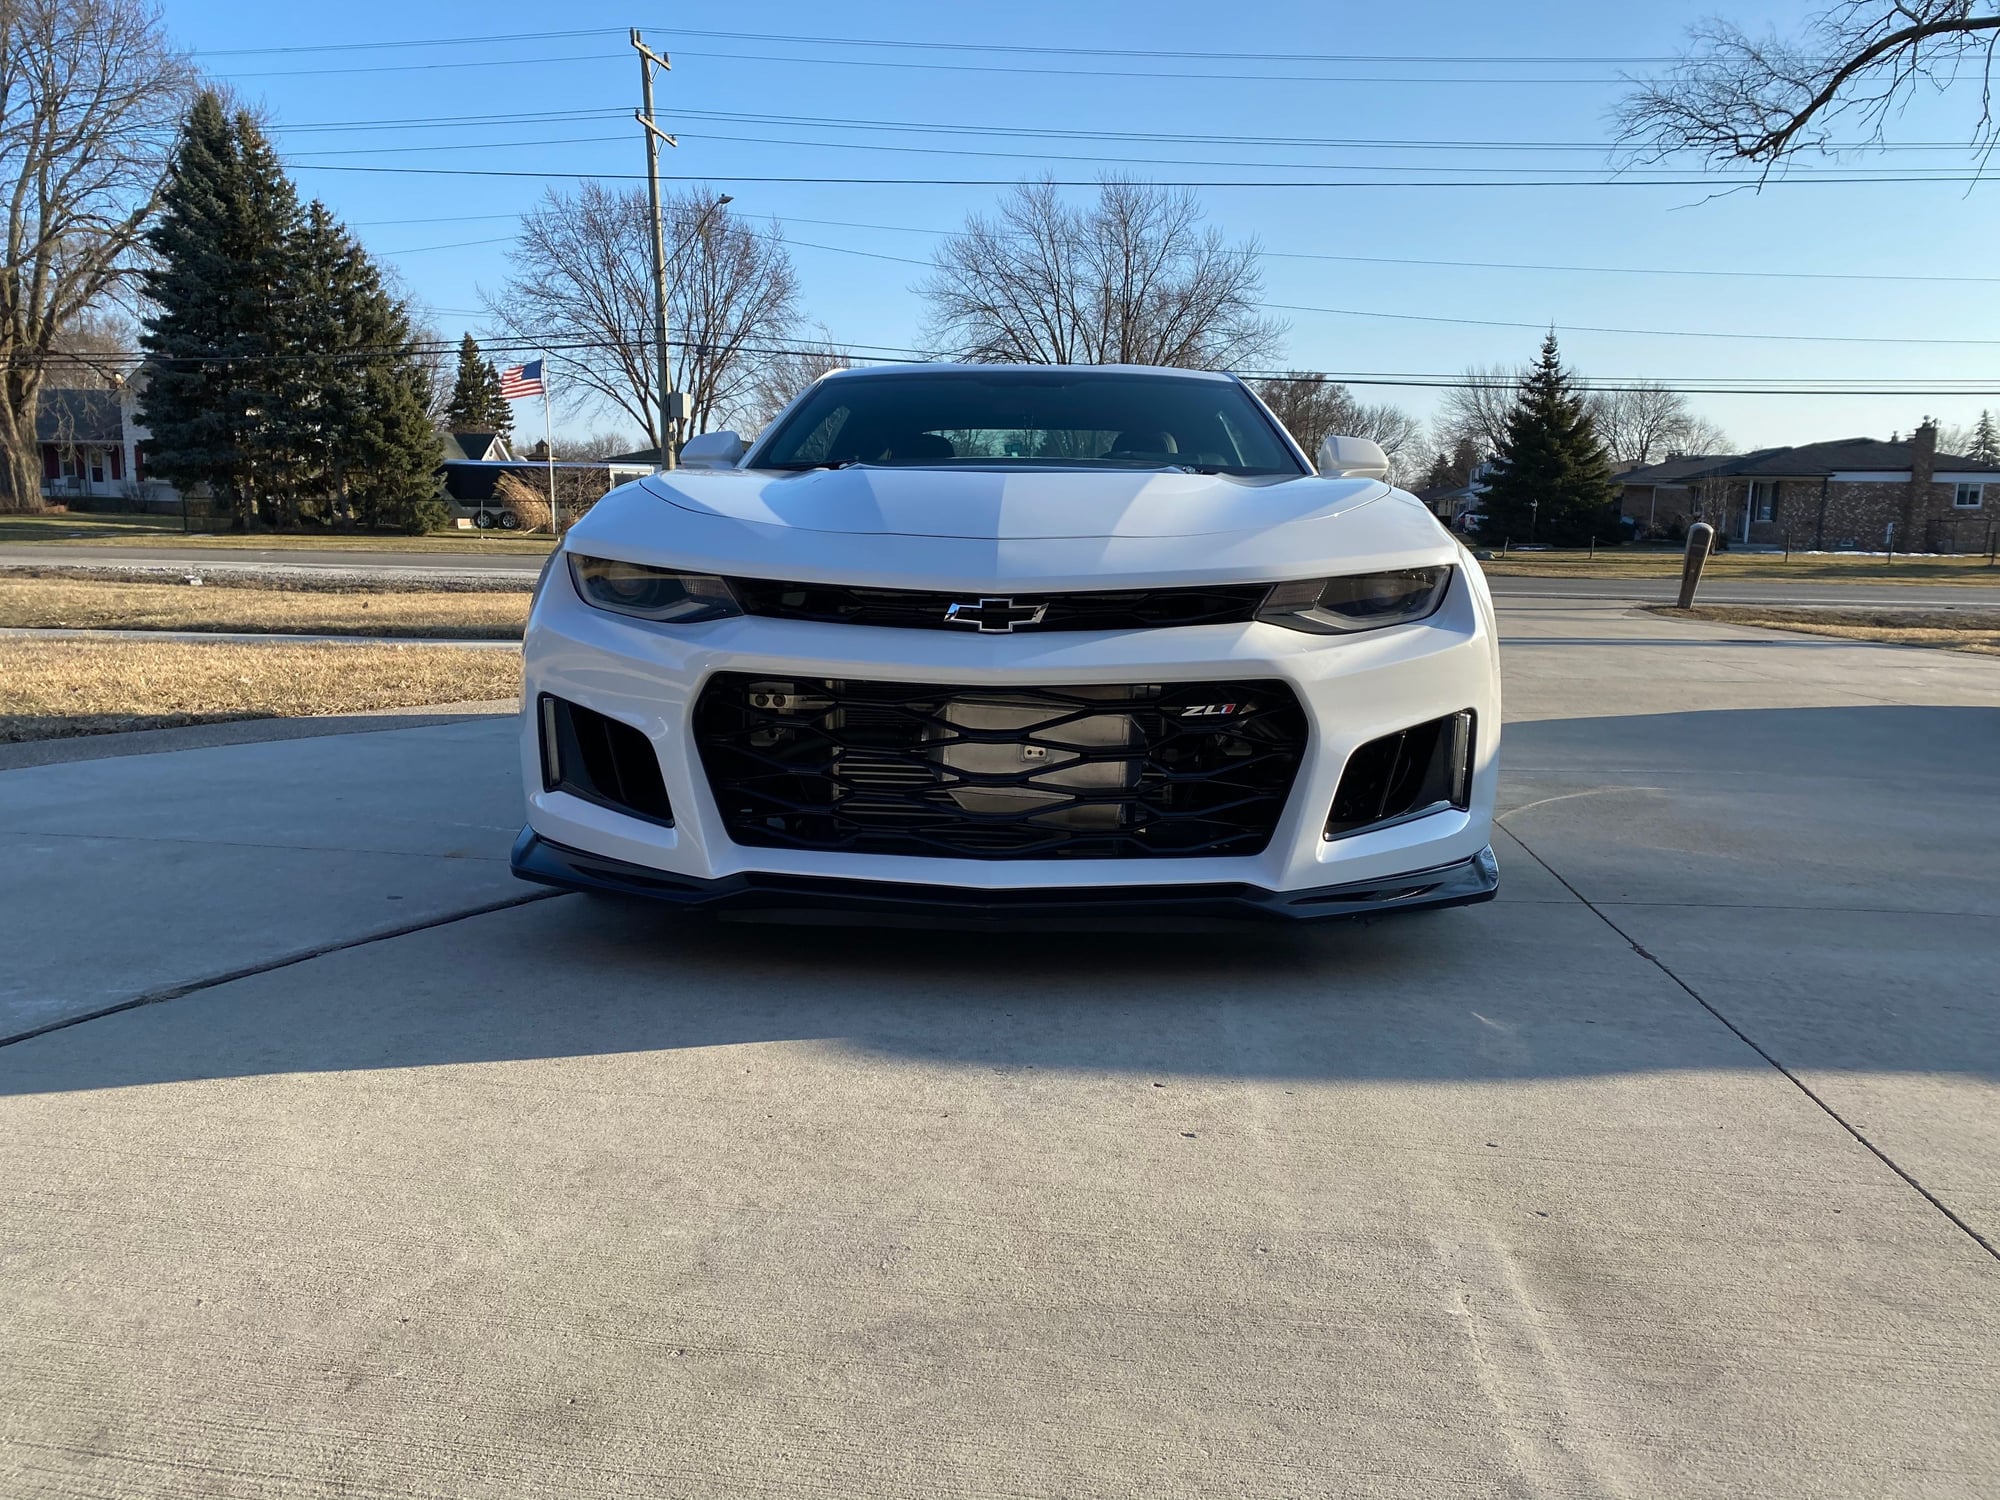 2018 Chevrolet Camaro - 2018 Camaro ZL1 Fully Built Bad A** - Used - VIN 1g1fk1r62j0143091 - 6,041 Miles - 8 cyl - 2WD - Automatic - Coupe - White - Sterling Heights, MI 48313, United States